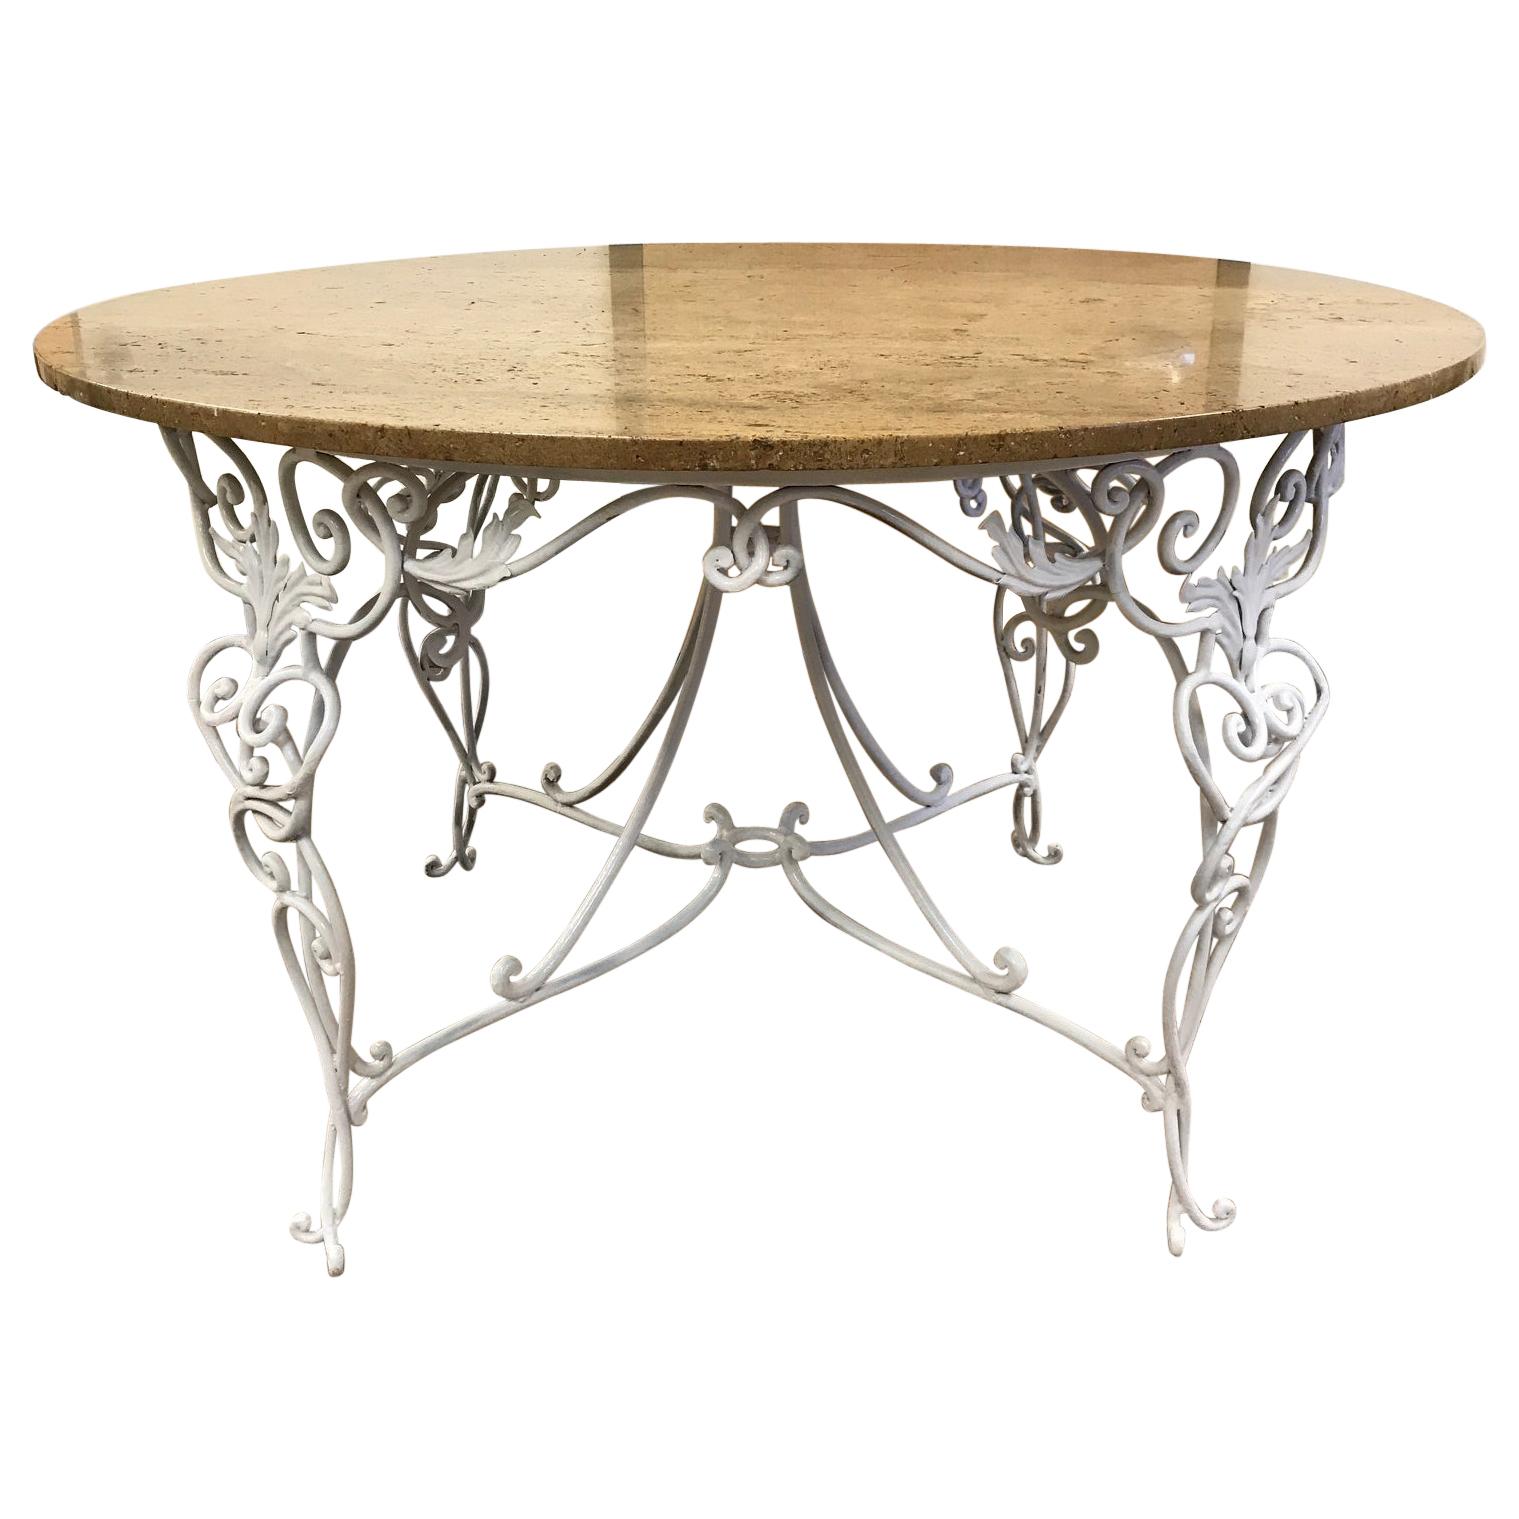 1940s French Wrought Iron Center Table Attributed to René Prou